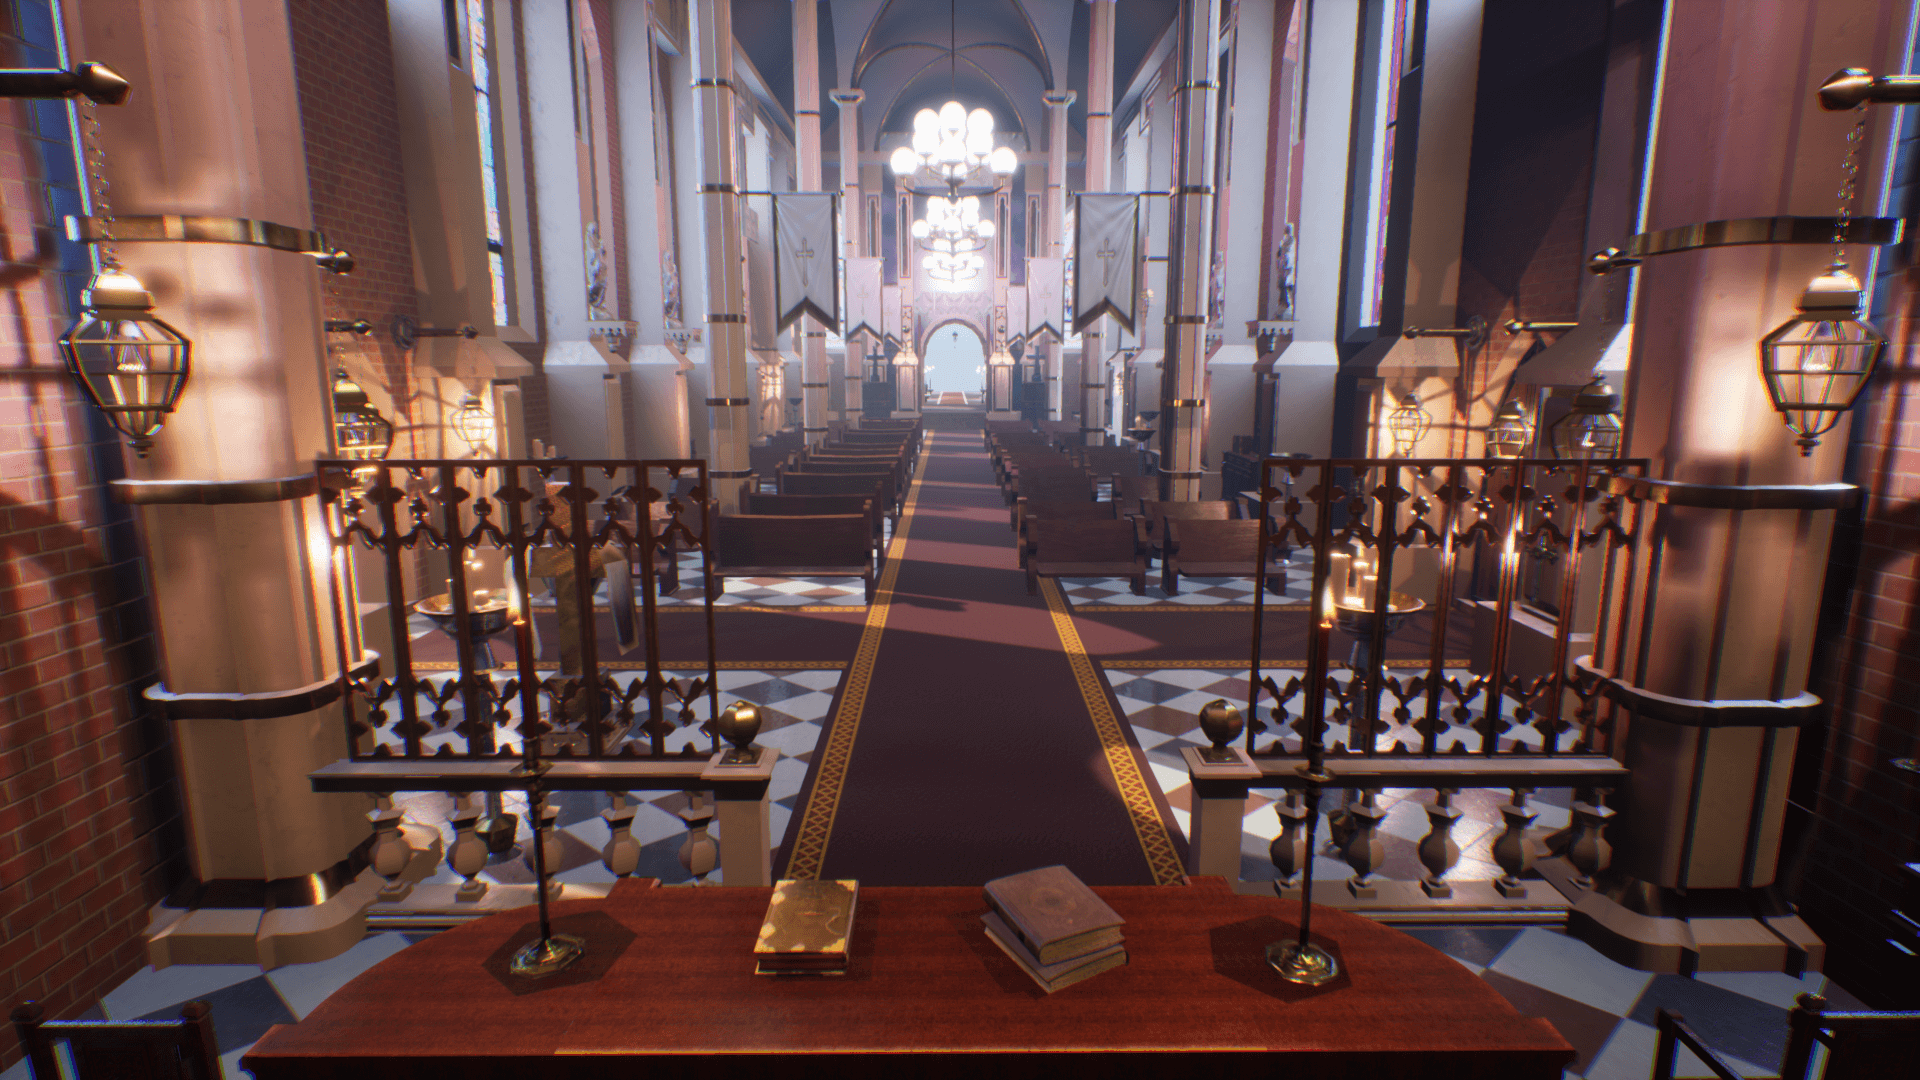 An image showing Cathedral asset pack, created with Unreal Engine.